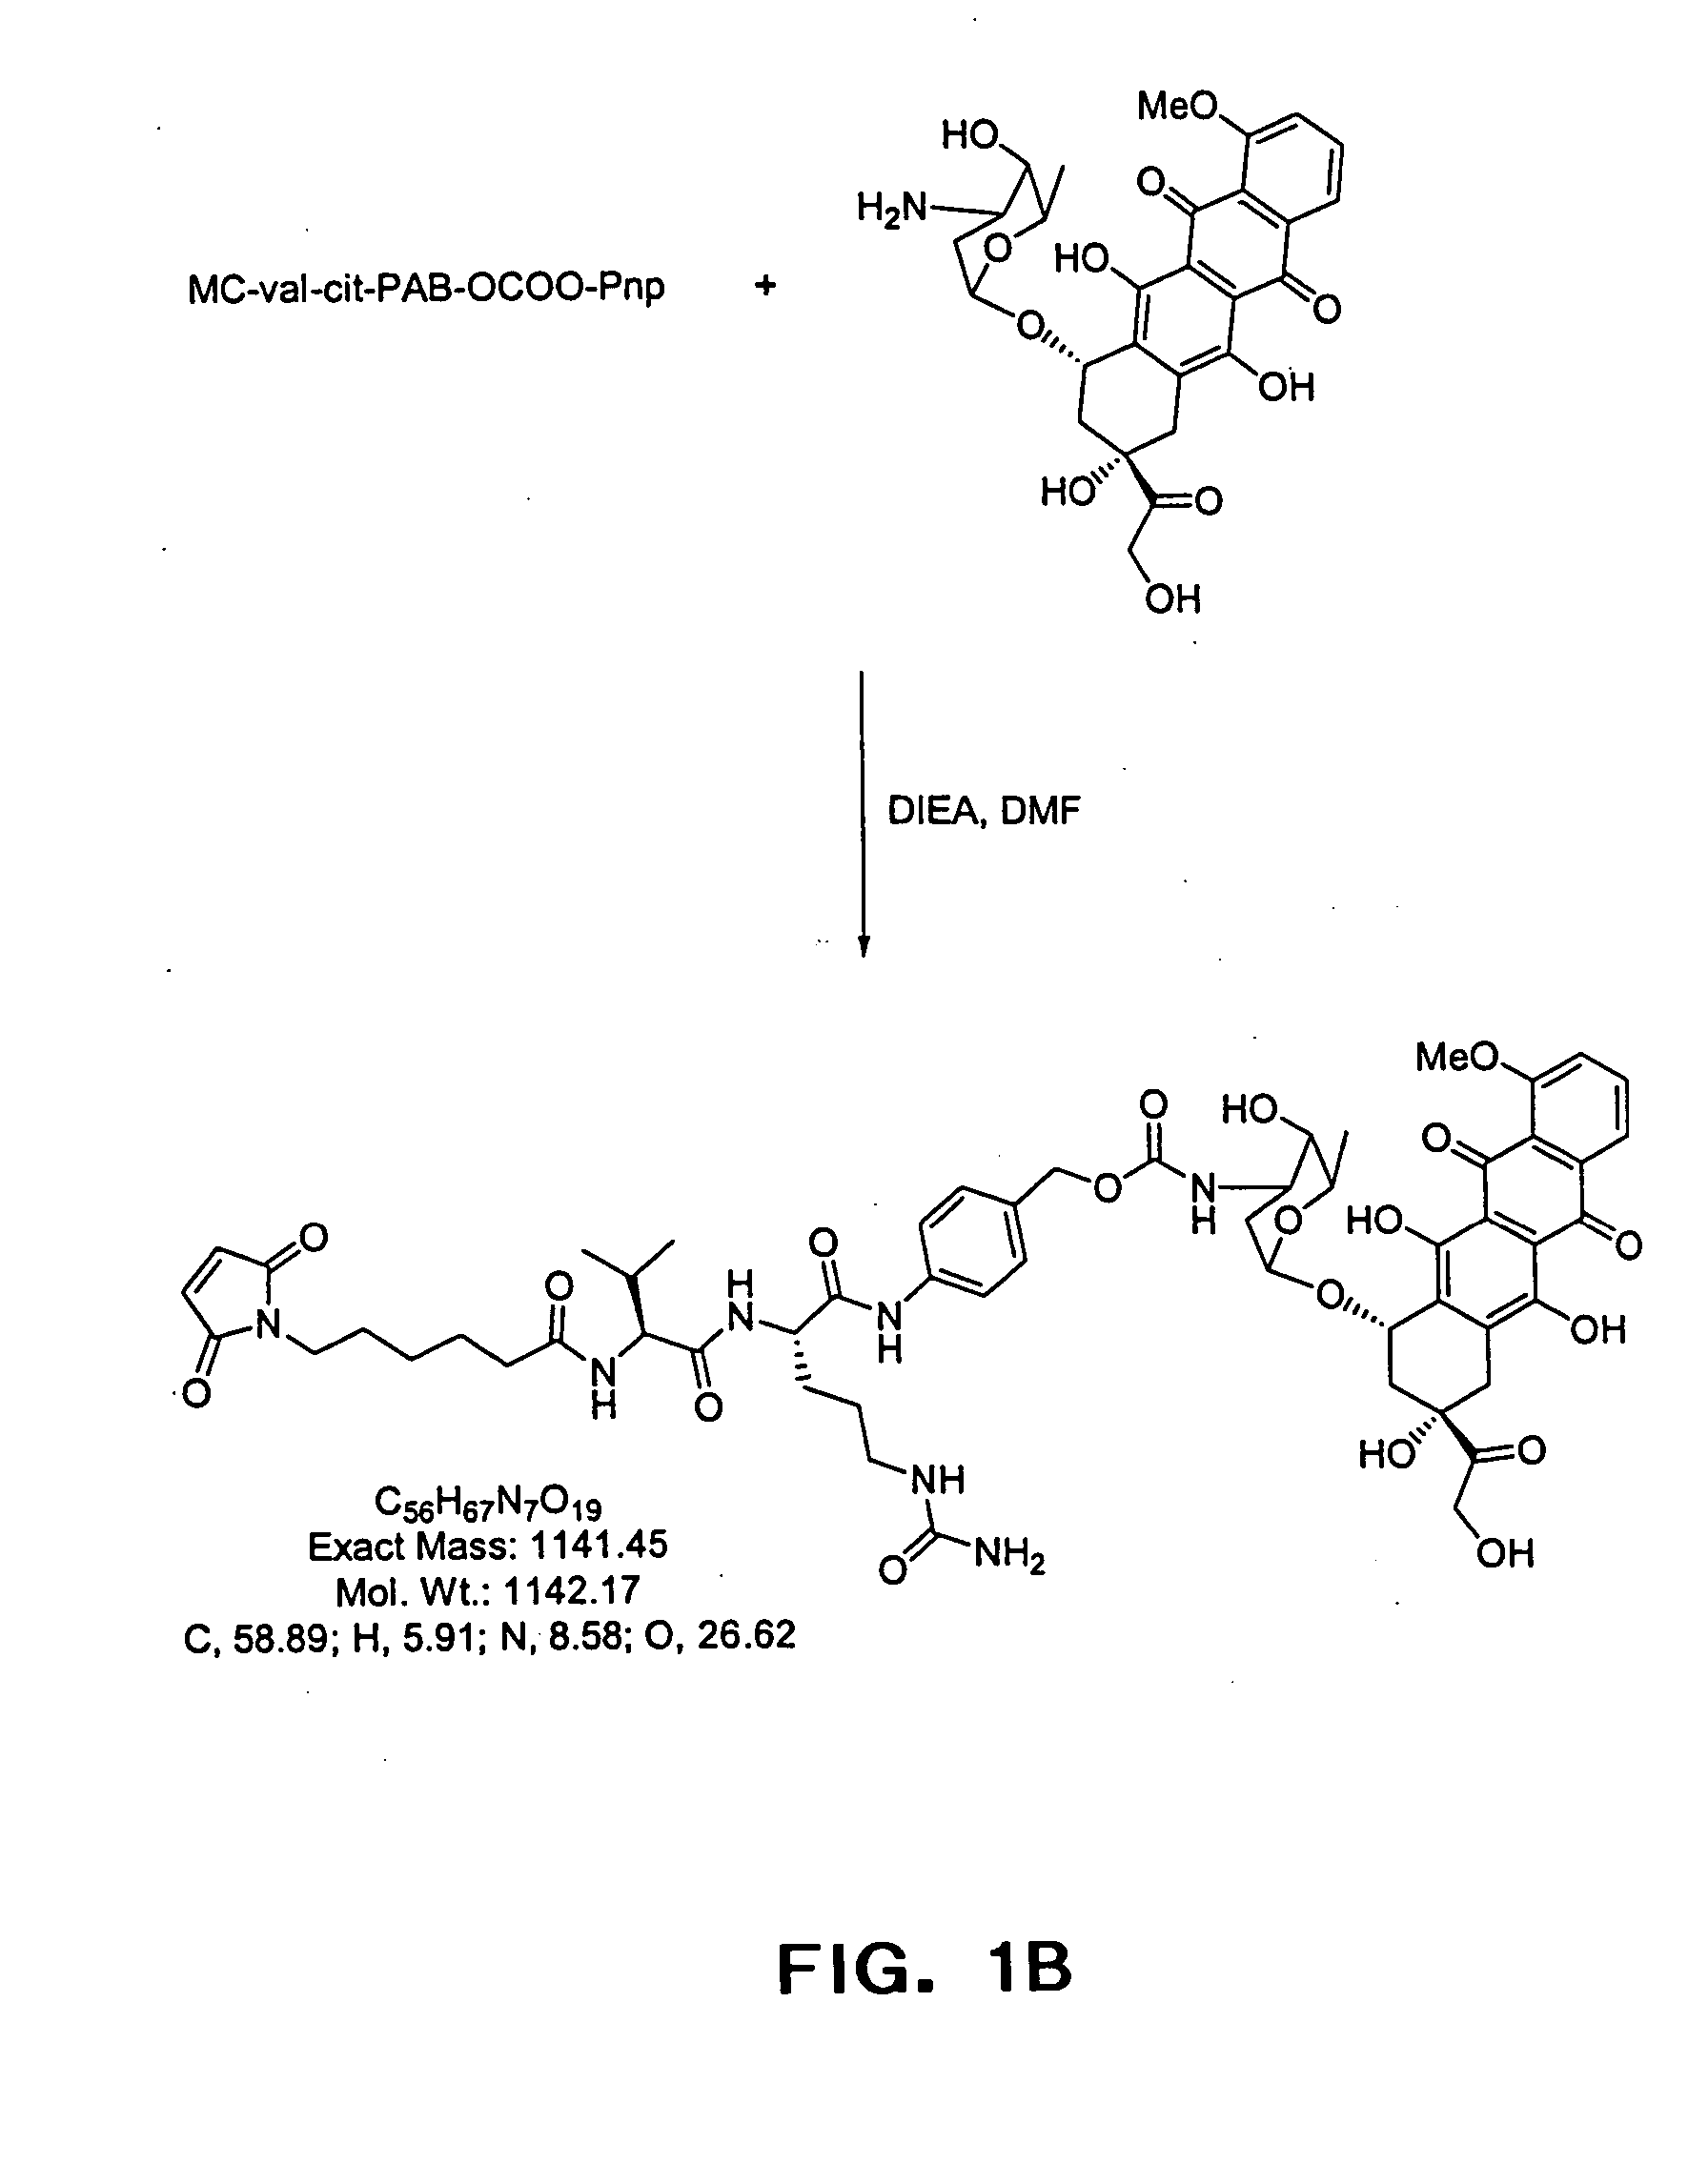 Anti-CD20 antibody-drug conjugates for the treatment of cancer and immune disorders